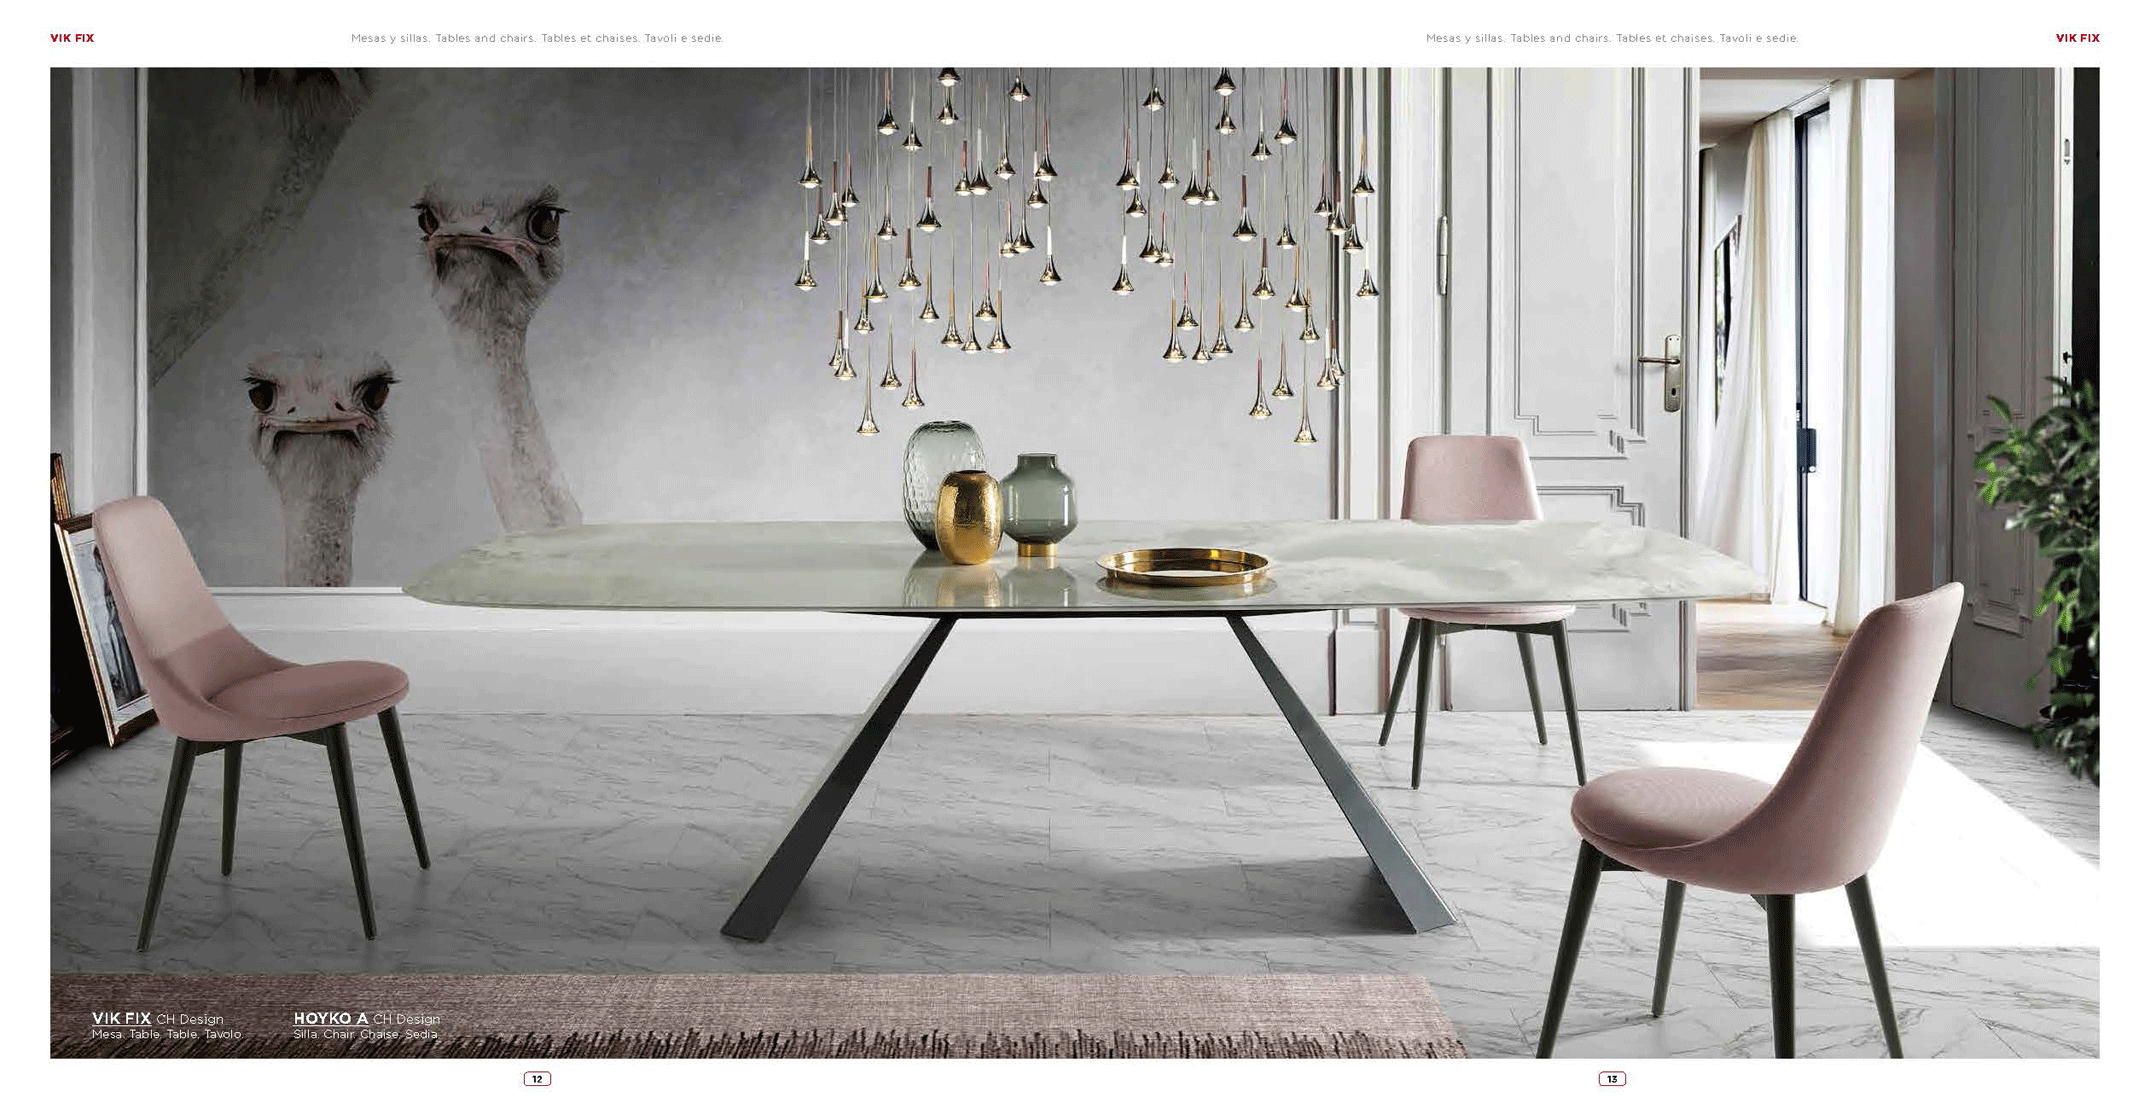 Brands Garcia Sabate REPLAY Vik Fix Table and Hoyko Chairs